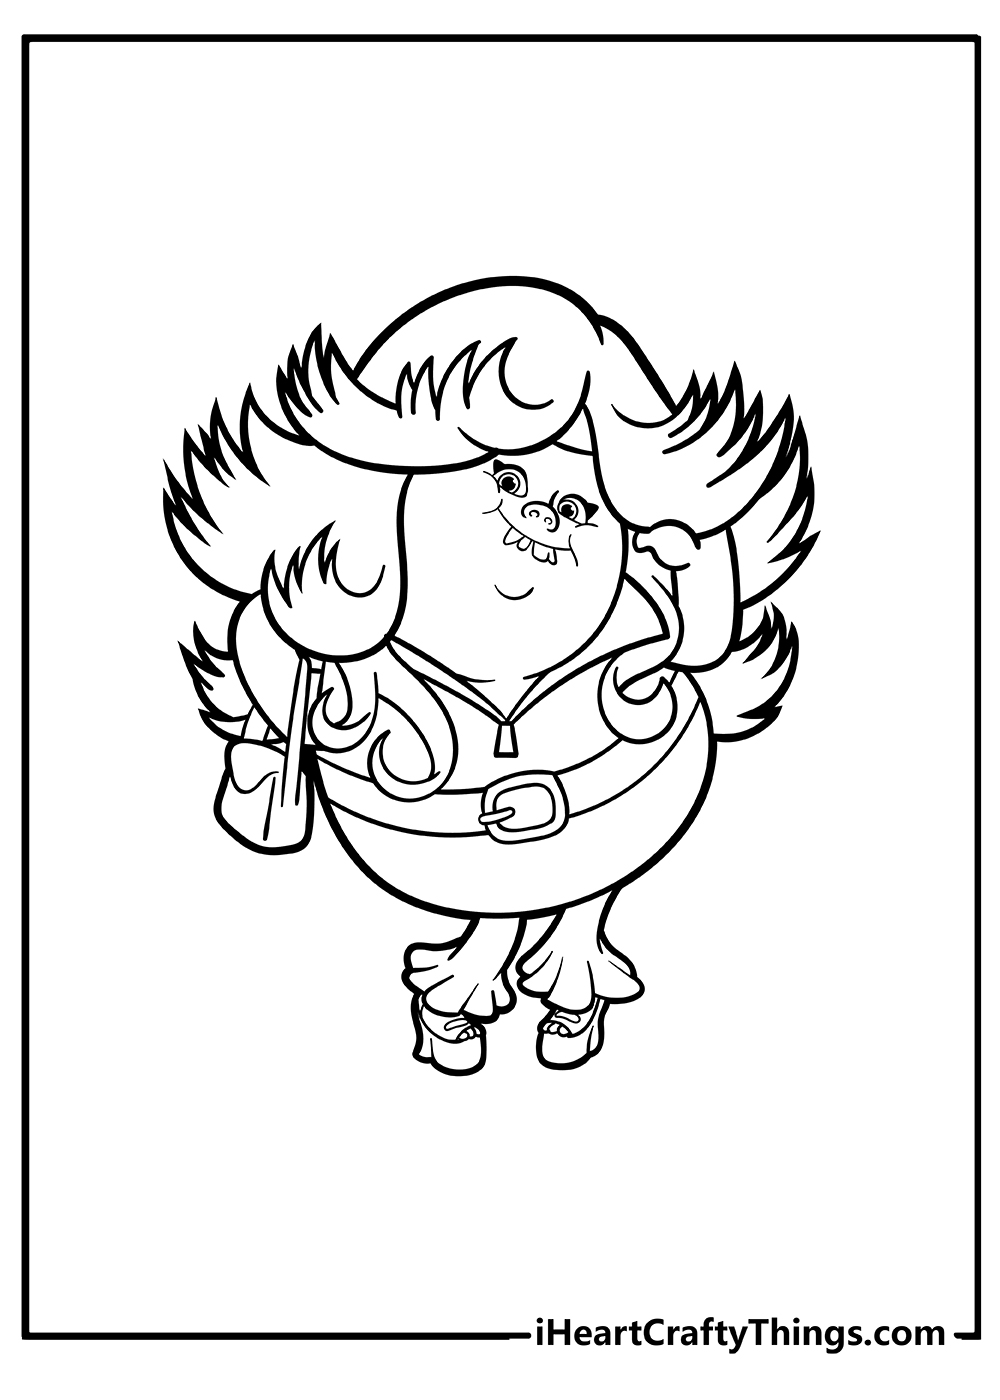 Troll Coloring Sheet for children free download